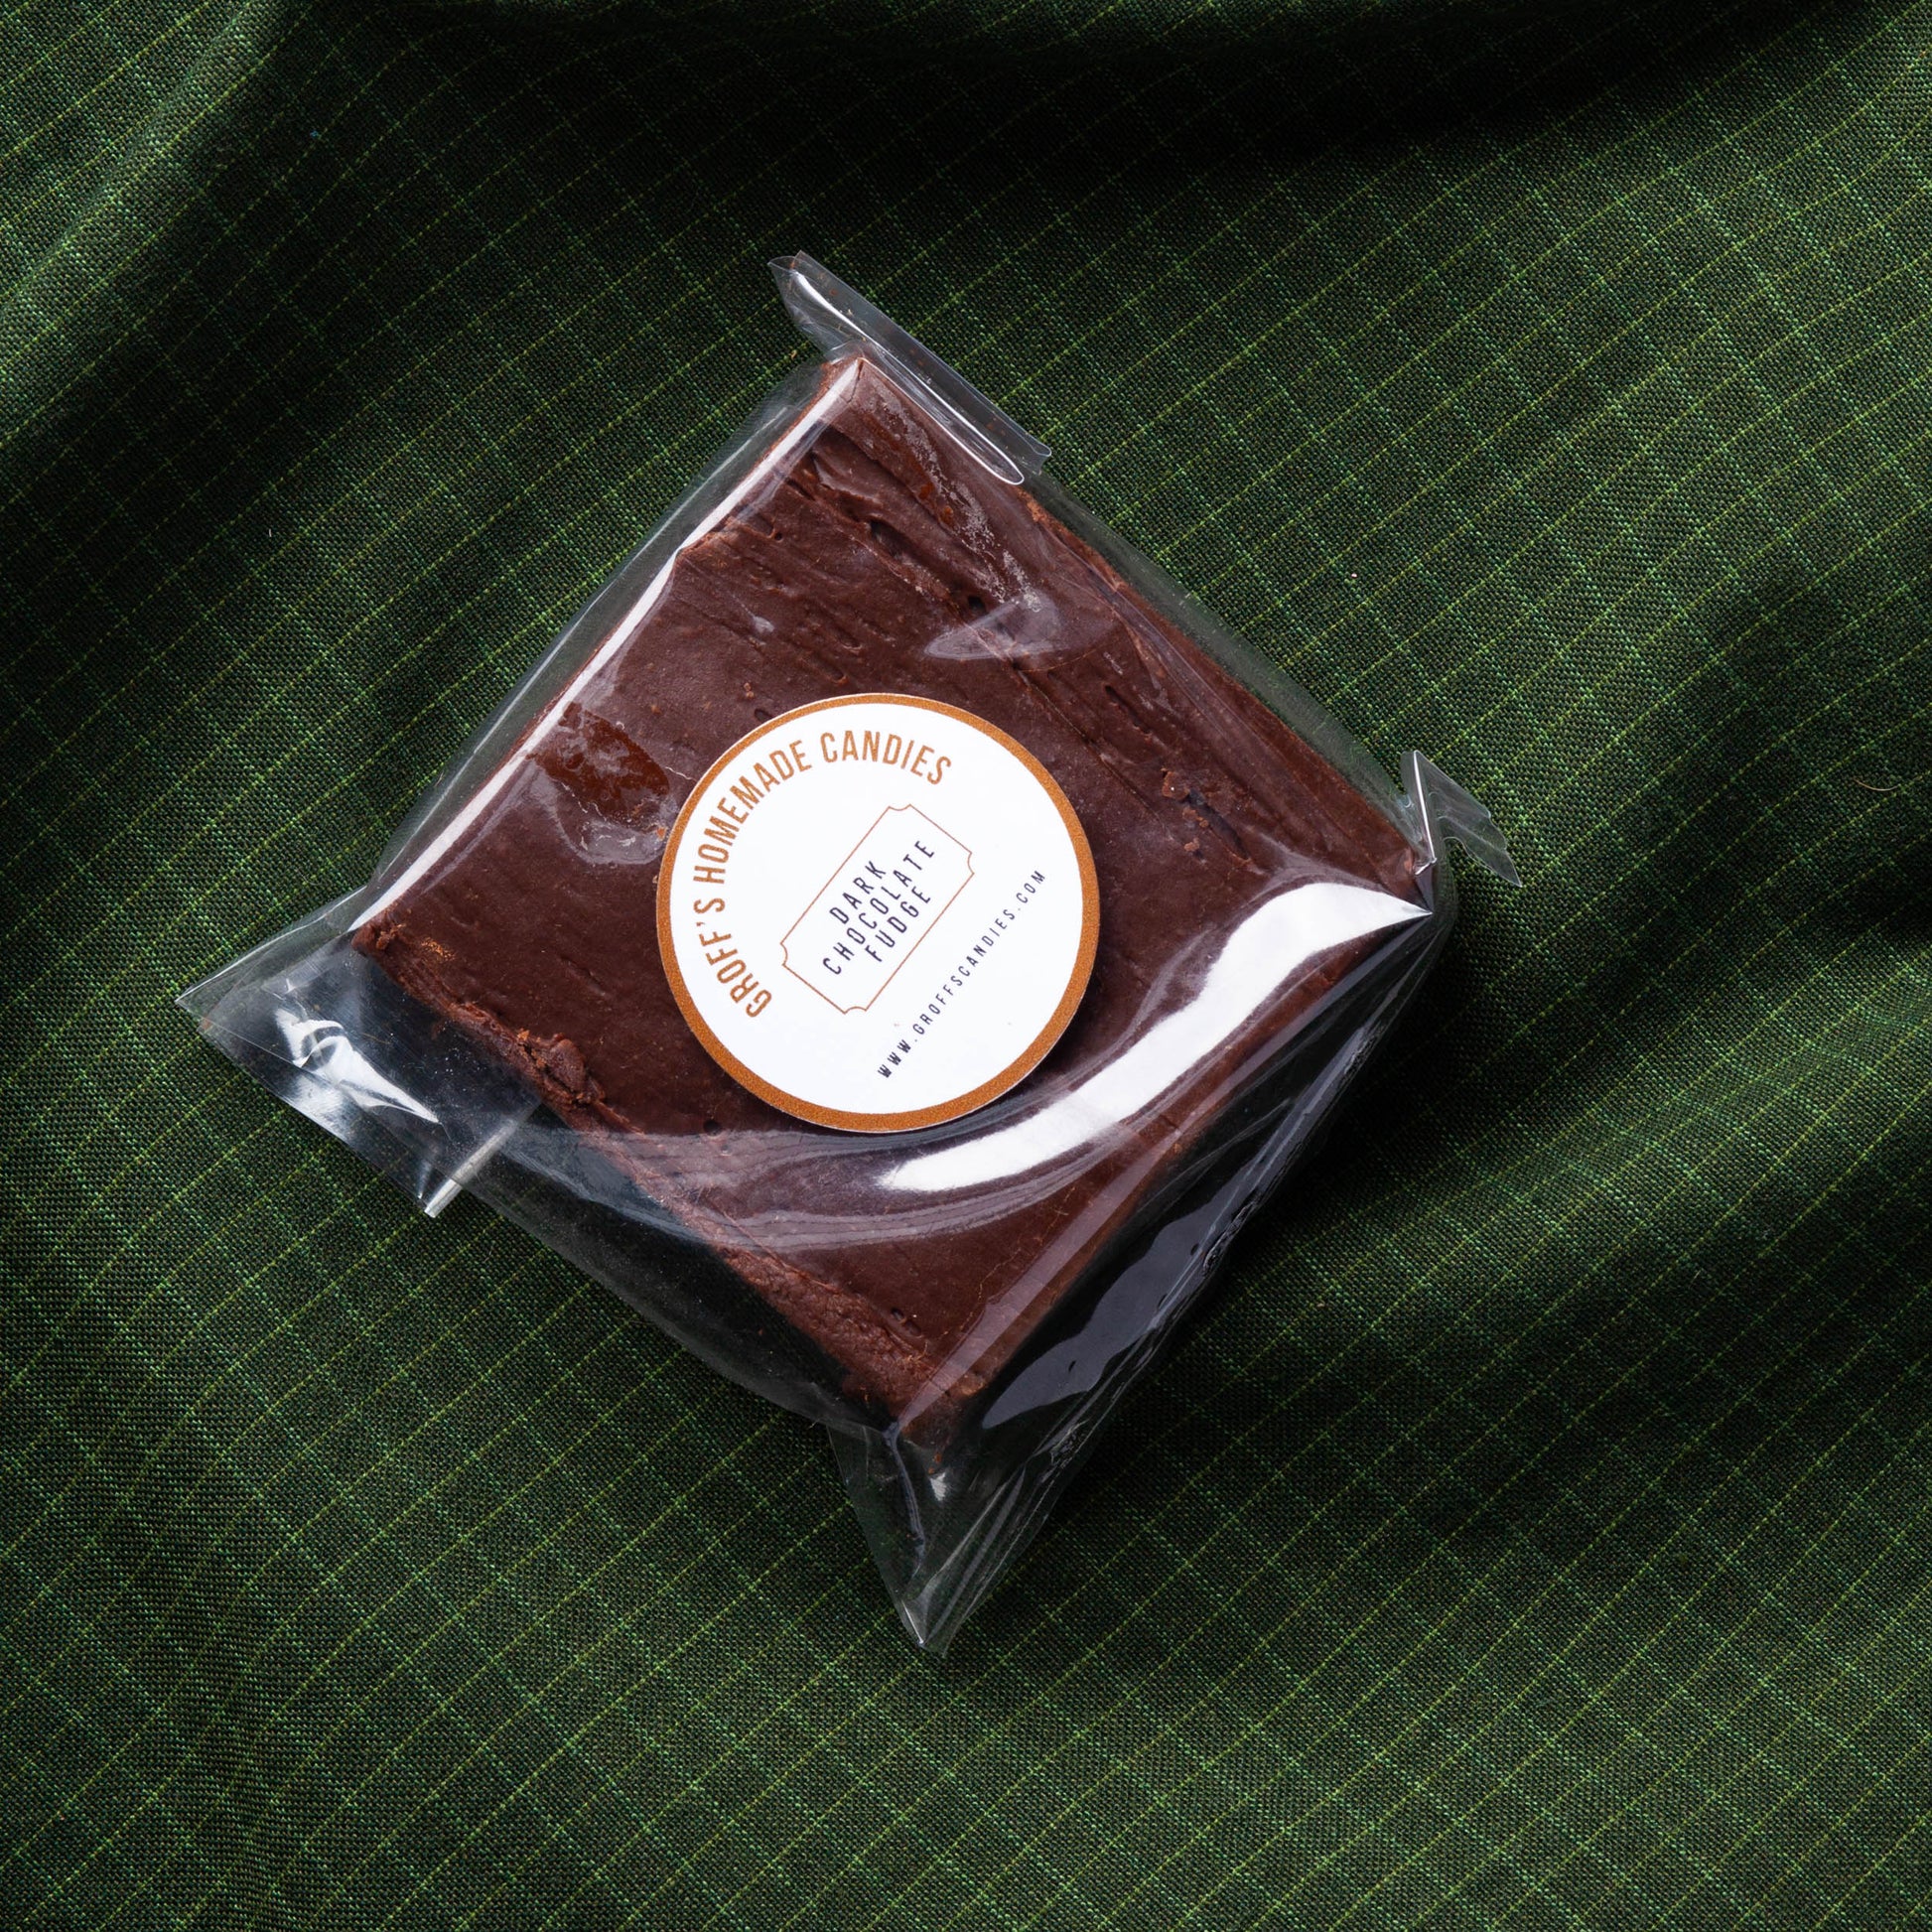 Square of Dark Chocolate Fudge from Groff's Candies